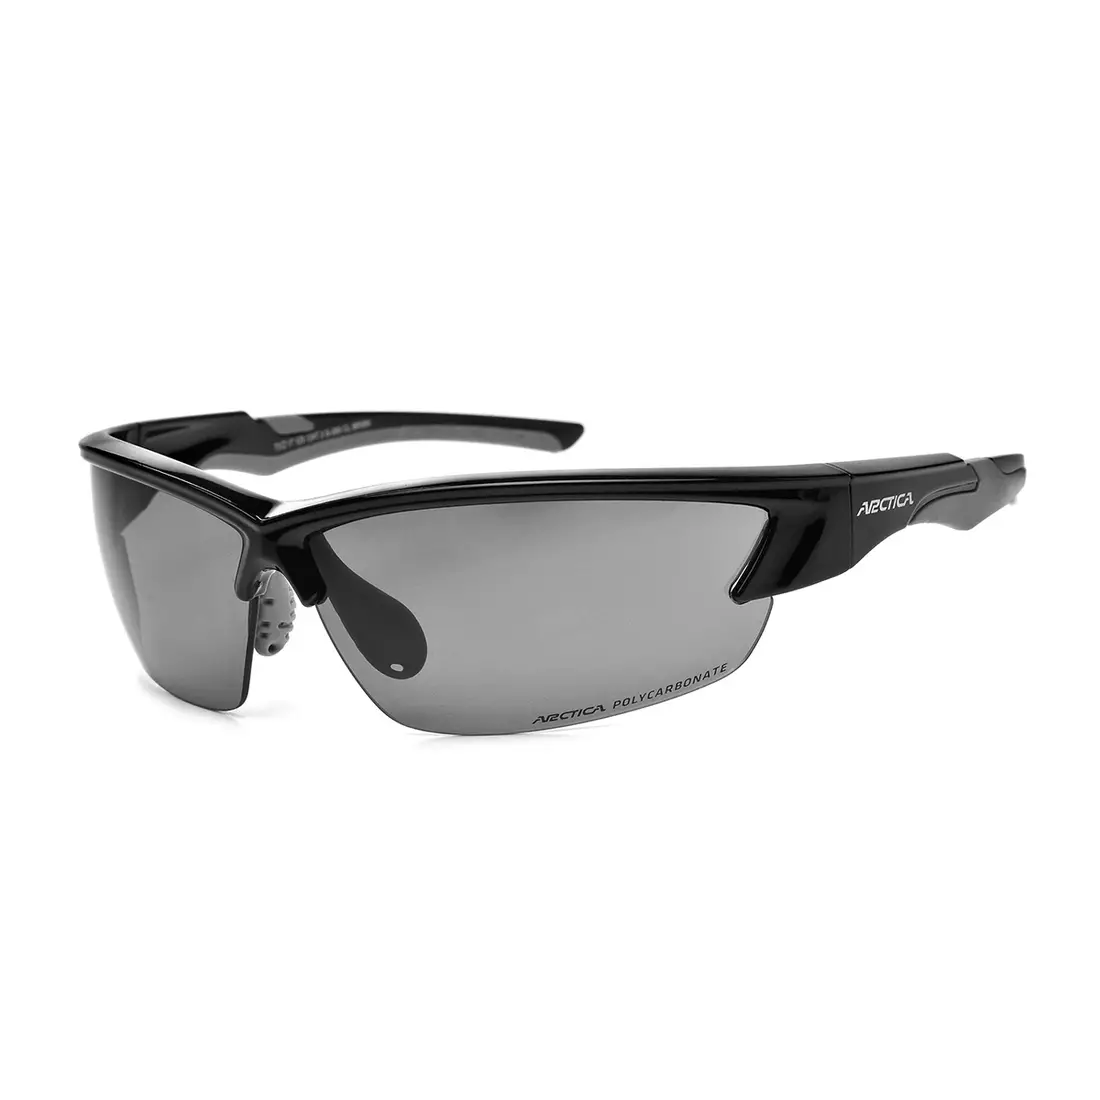 ARCTICA S-285 cycling/sports glasses